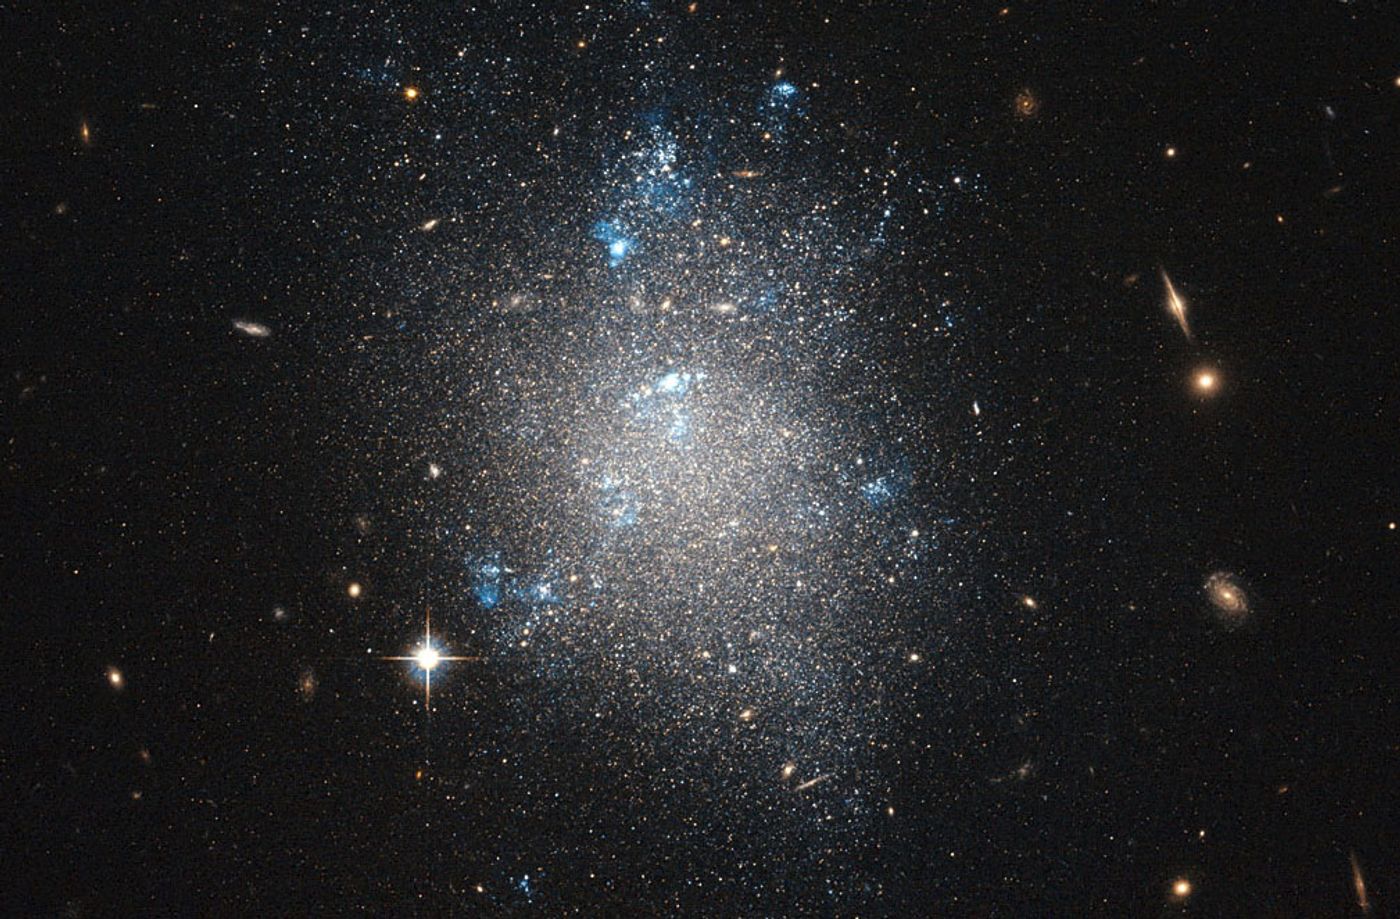 Dwarf galaxies are small and faint, but researchers say they could tell a story of the early universe.